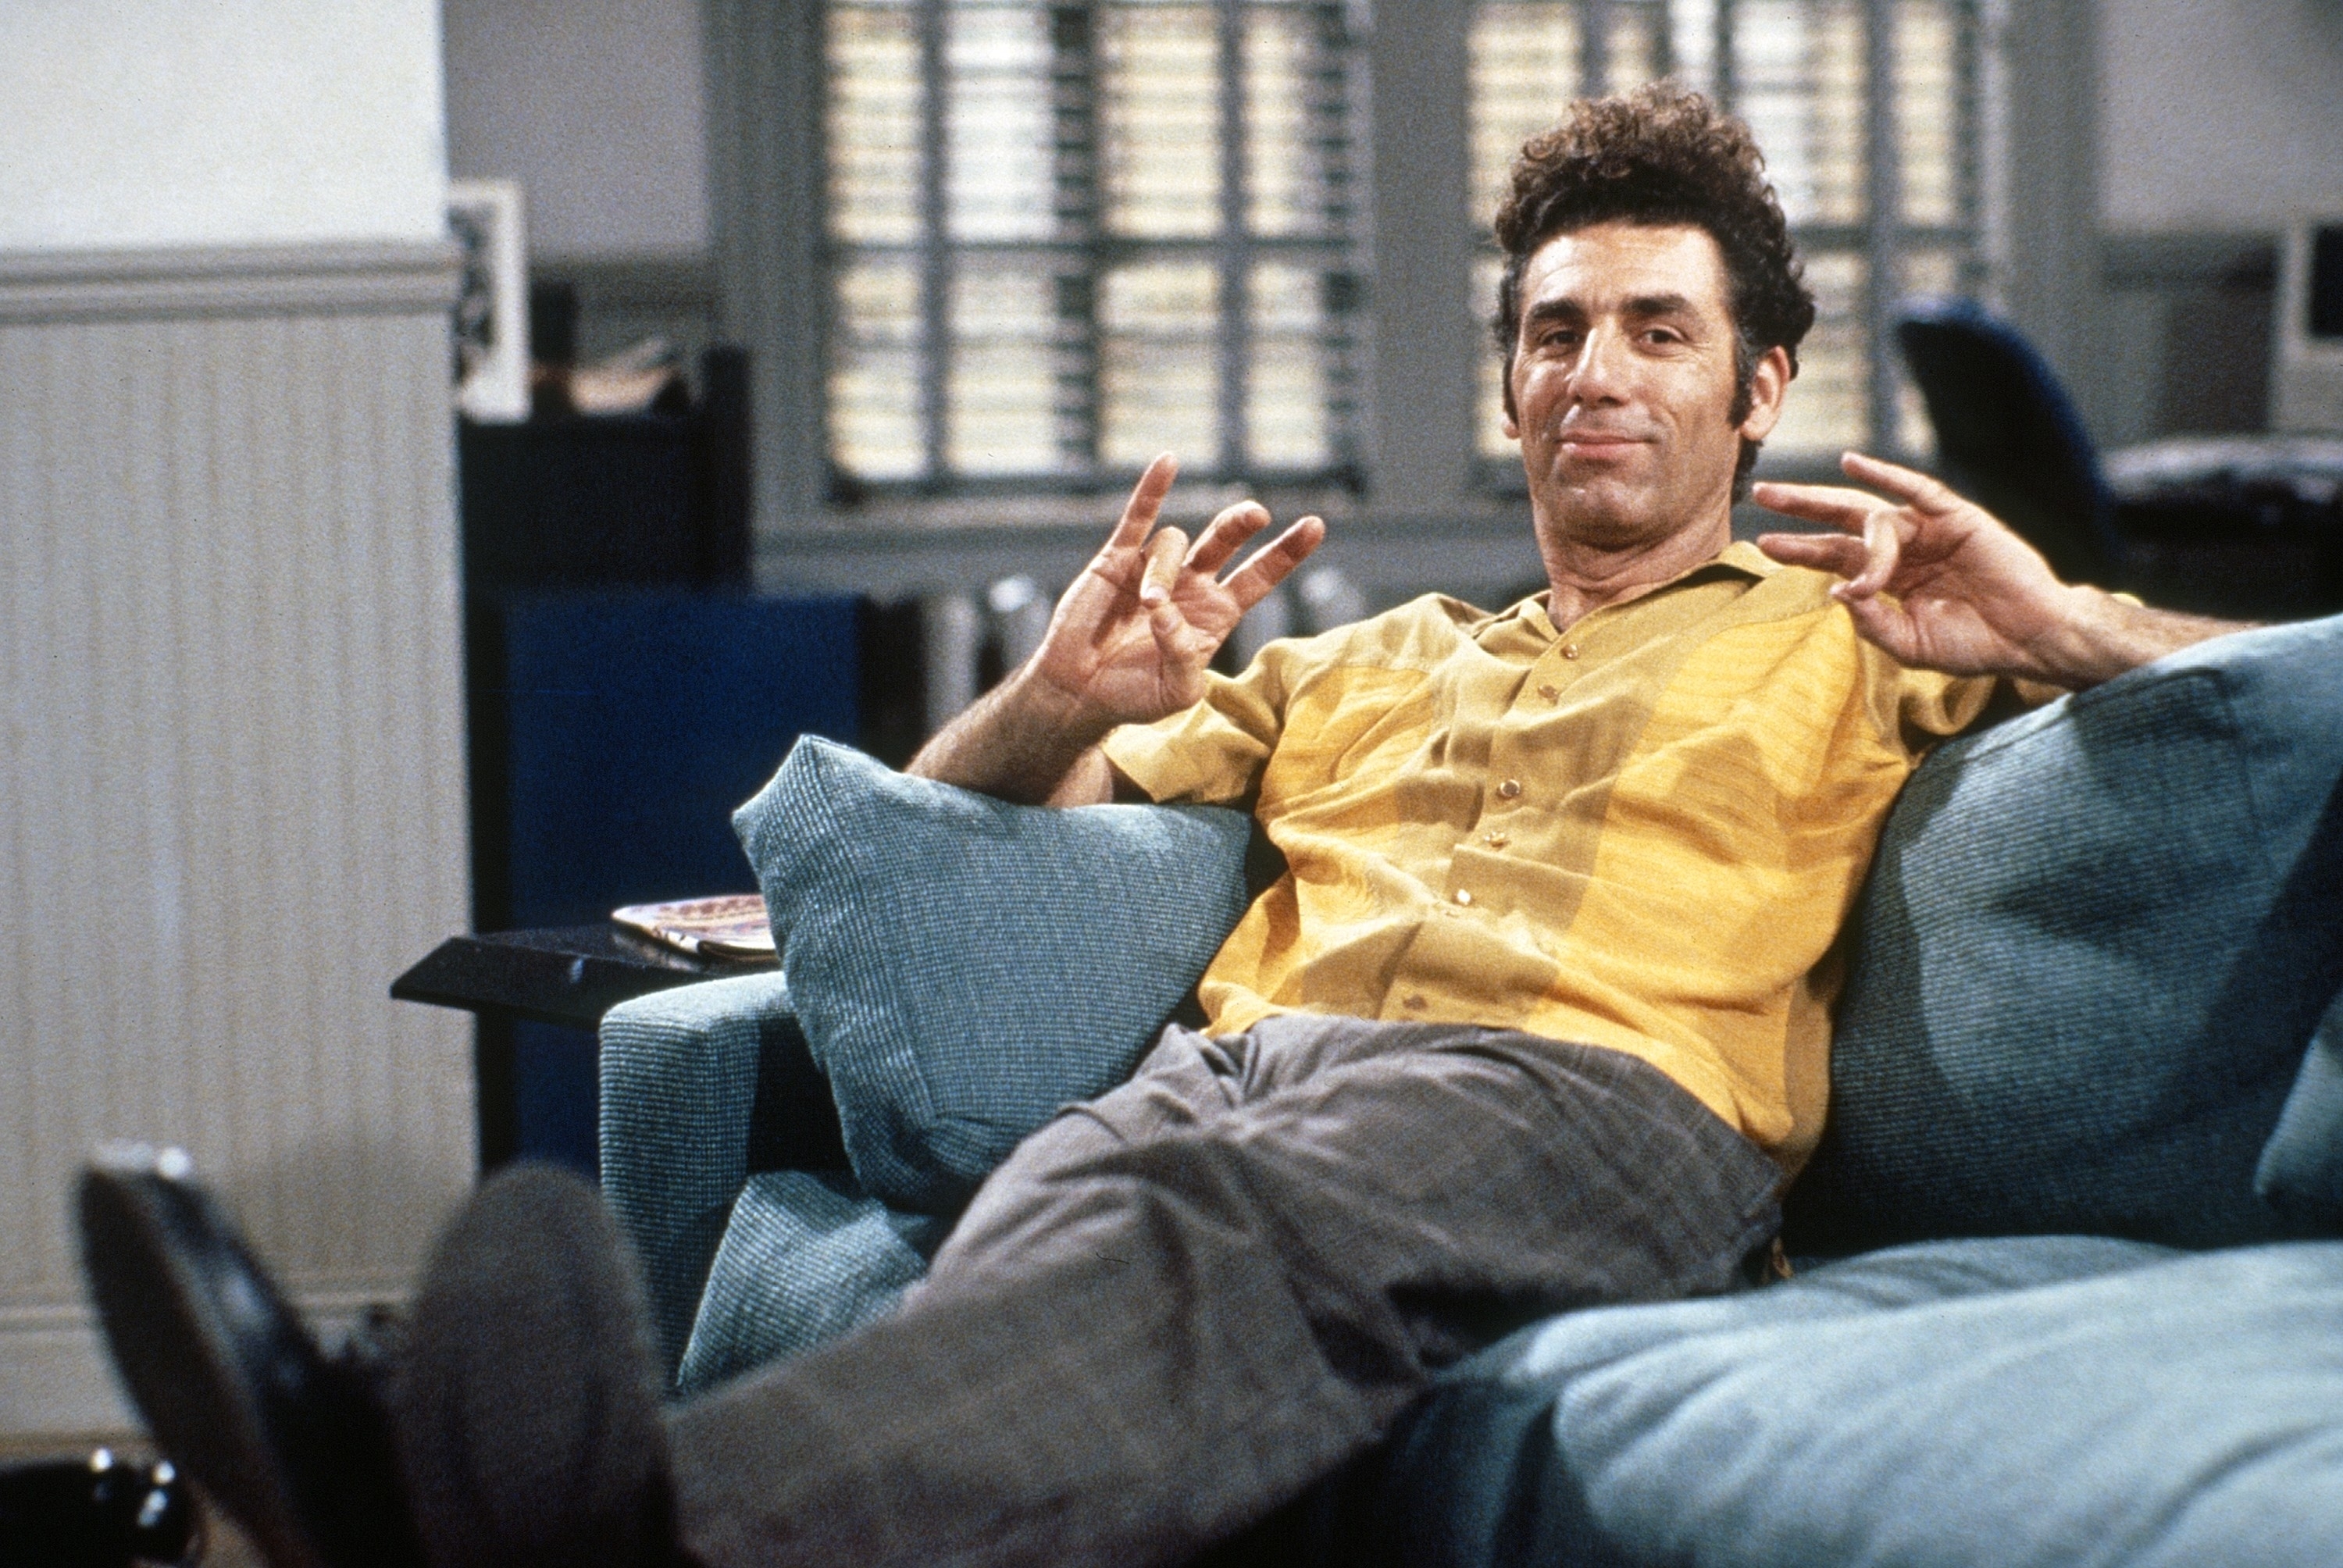 Michael Richards, as Kramer from Seinfeld, reclines on a couch with his legs up, wearing a casual shirt and relaxed trousers, holding a quirky hand gesture